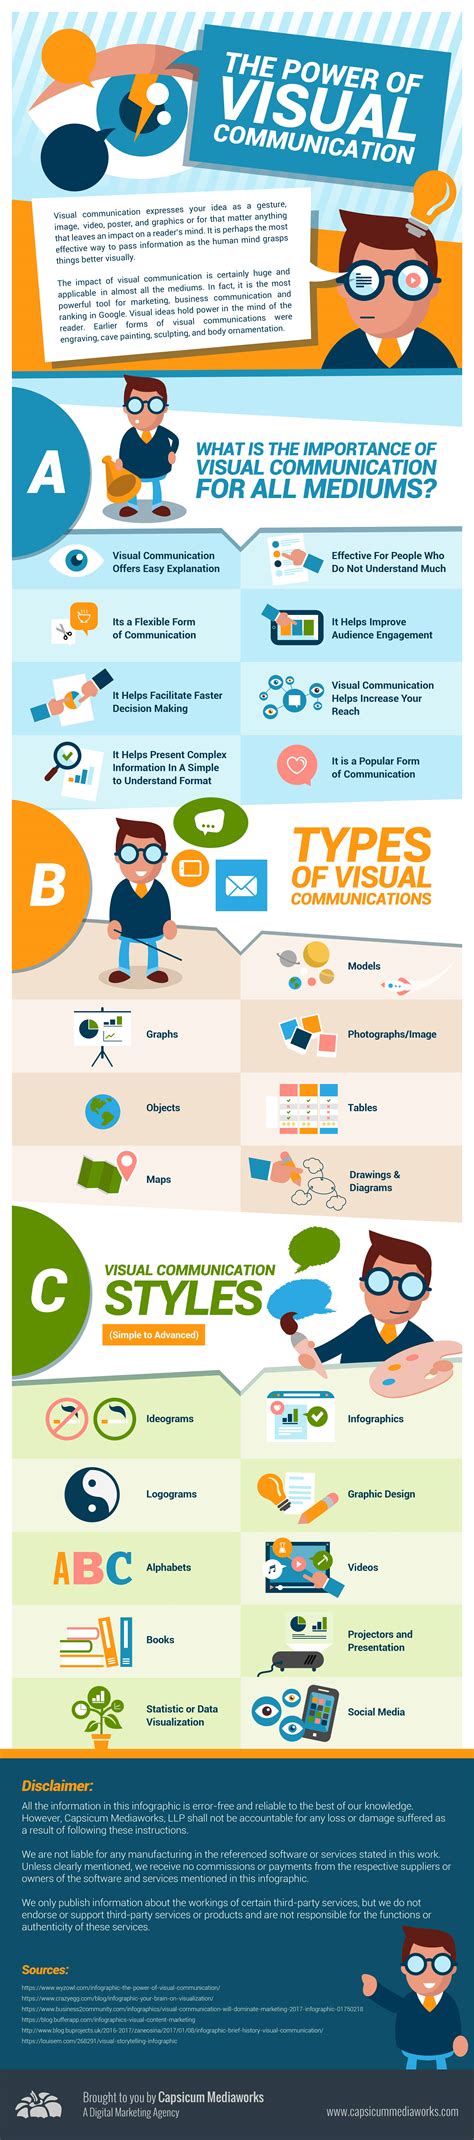 The Power Of Visual Communication [infographic]